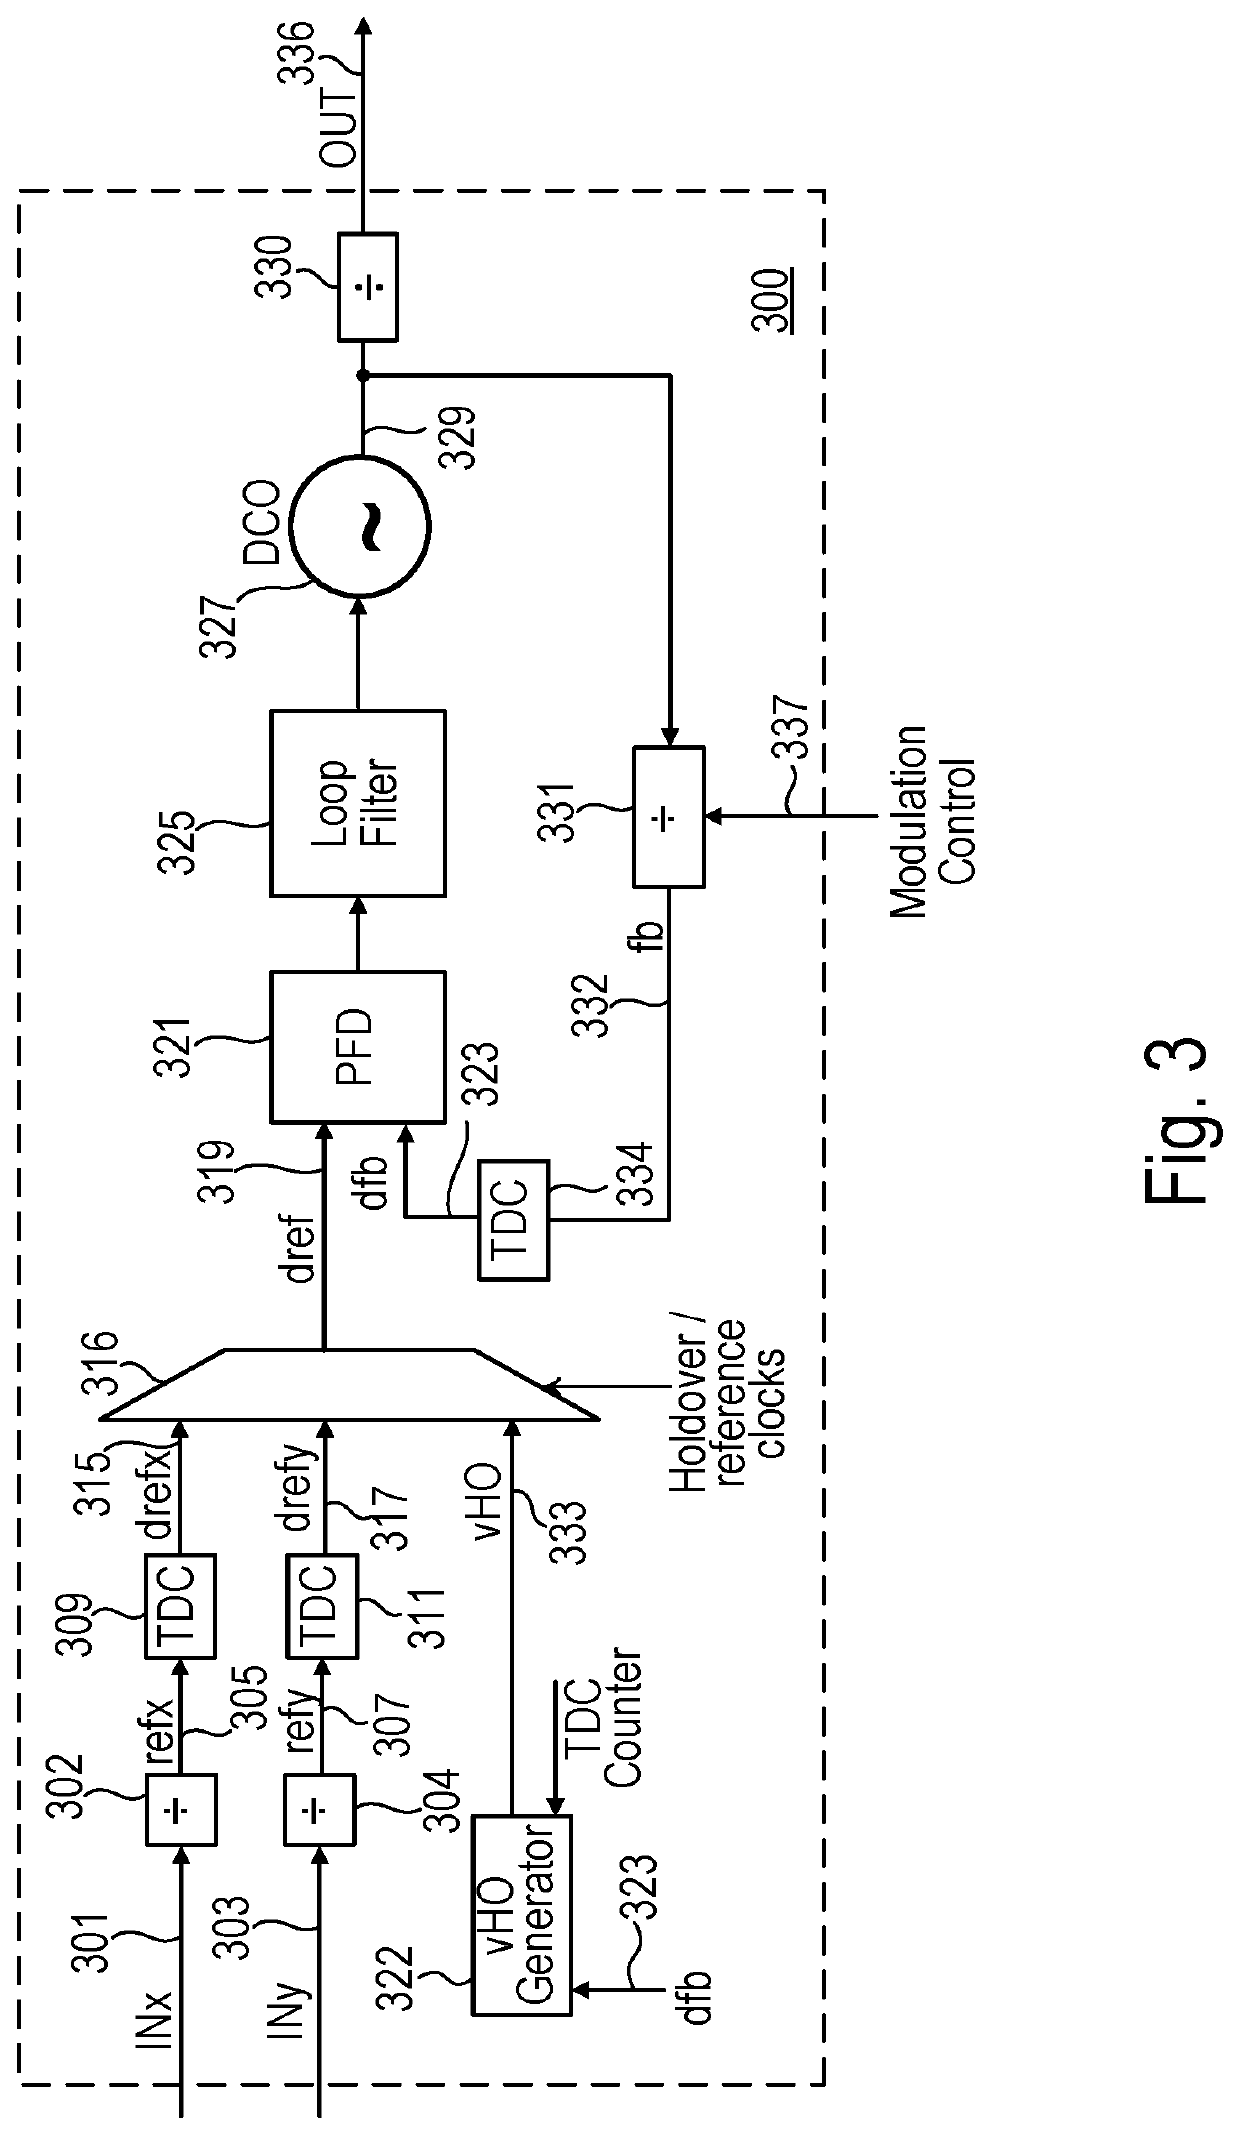 Use of a virtual clock in a PLL to maintain a closed loop system